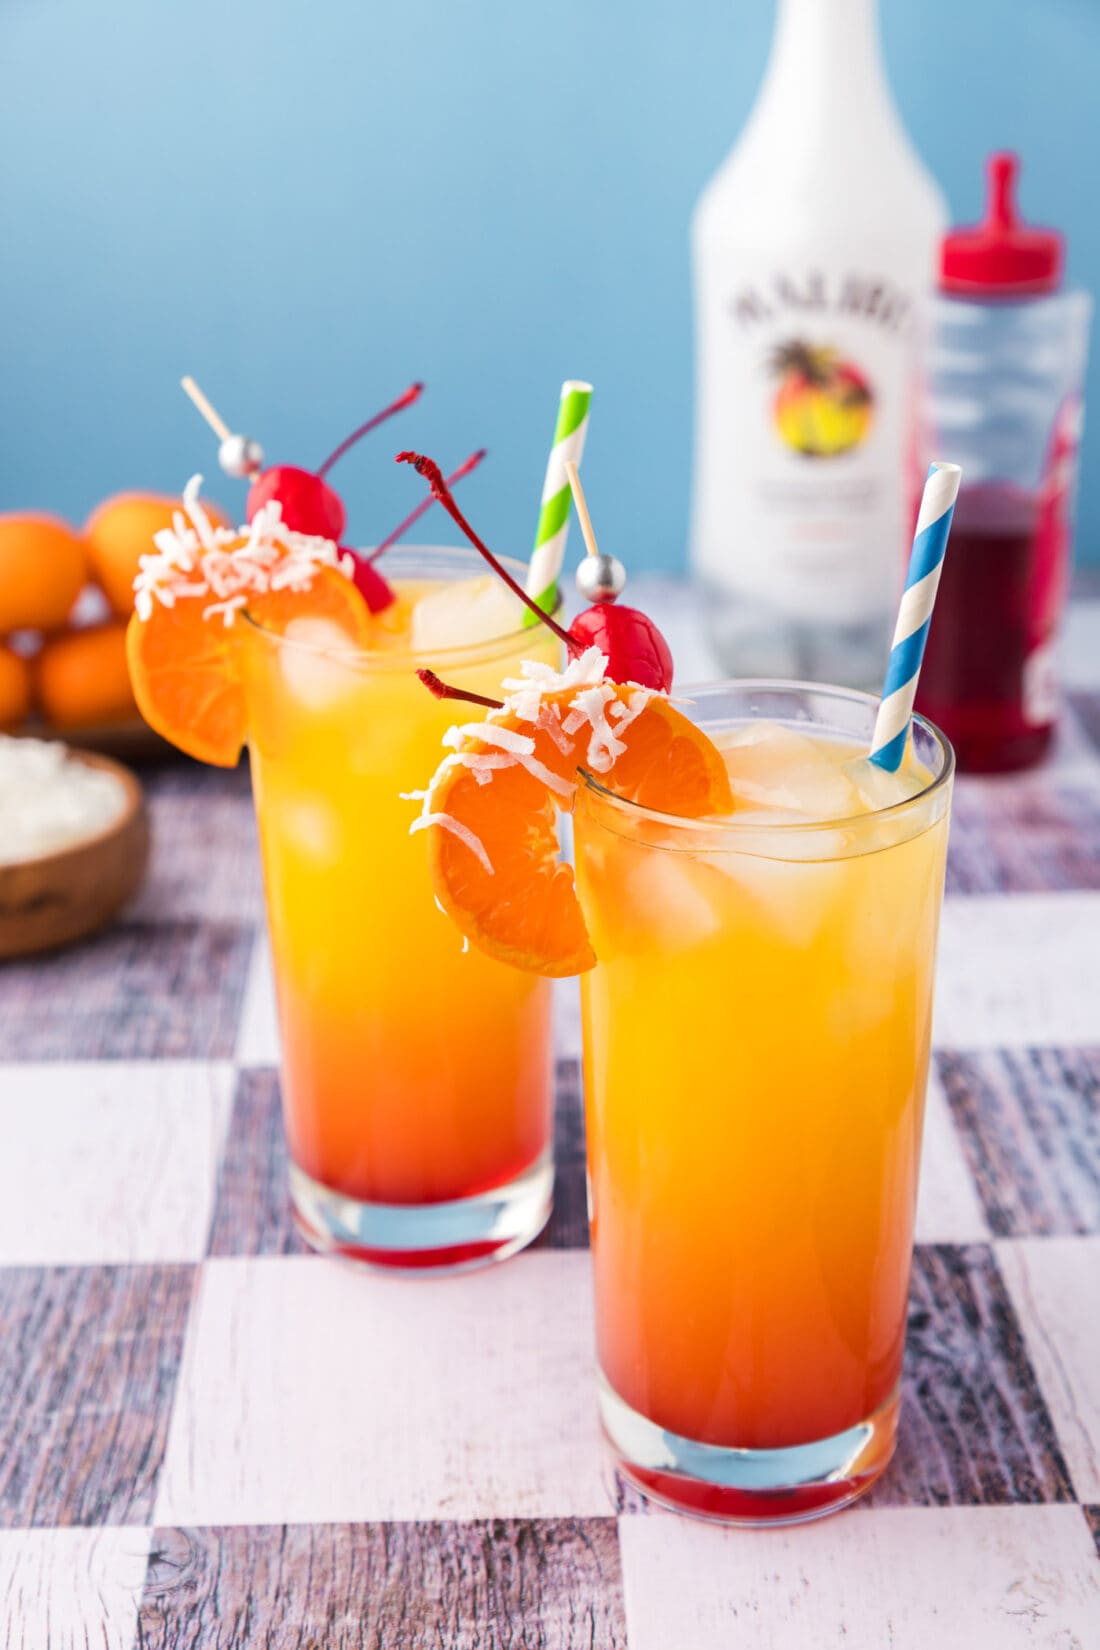 Two Malibu Sunrise topped with an orange wheel and cherry.